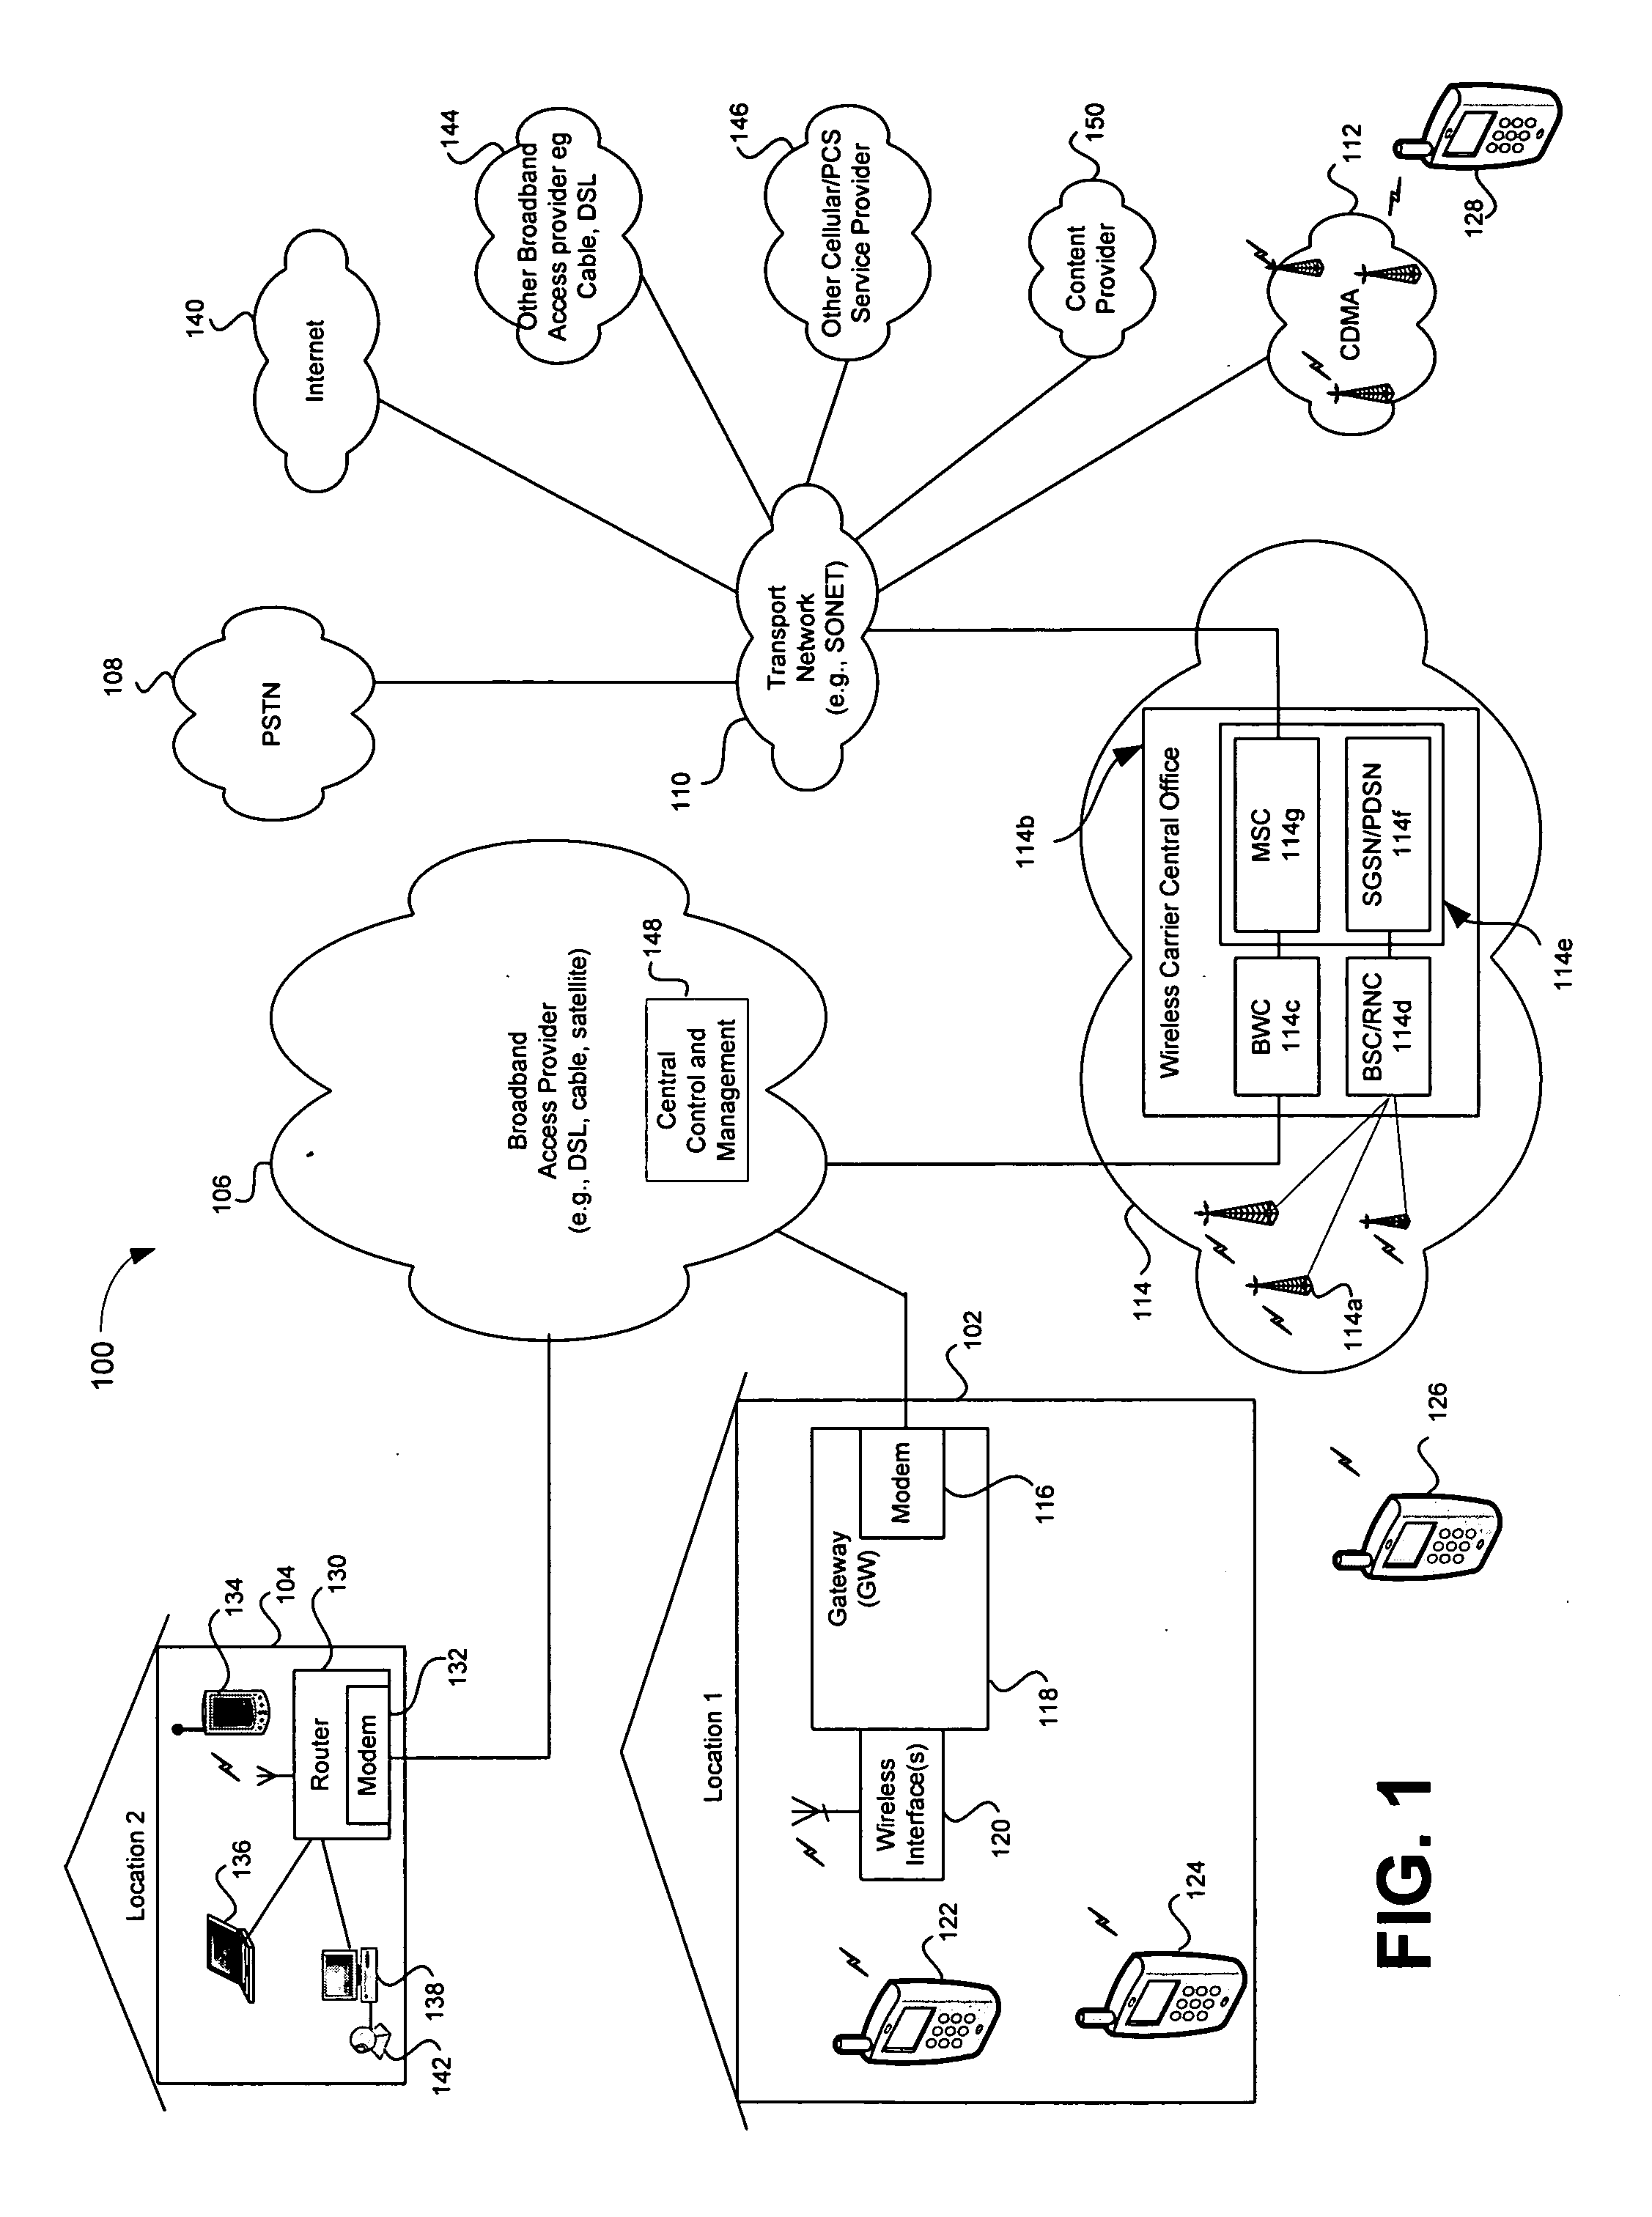 Enhanced caller ID information based on access device information via a broadband access gateway